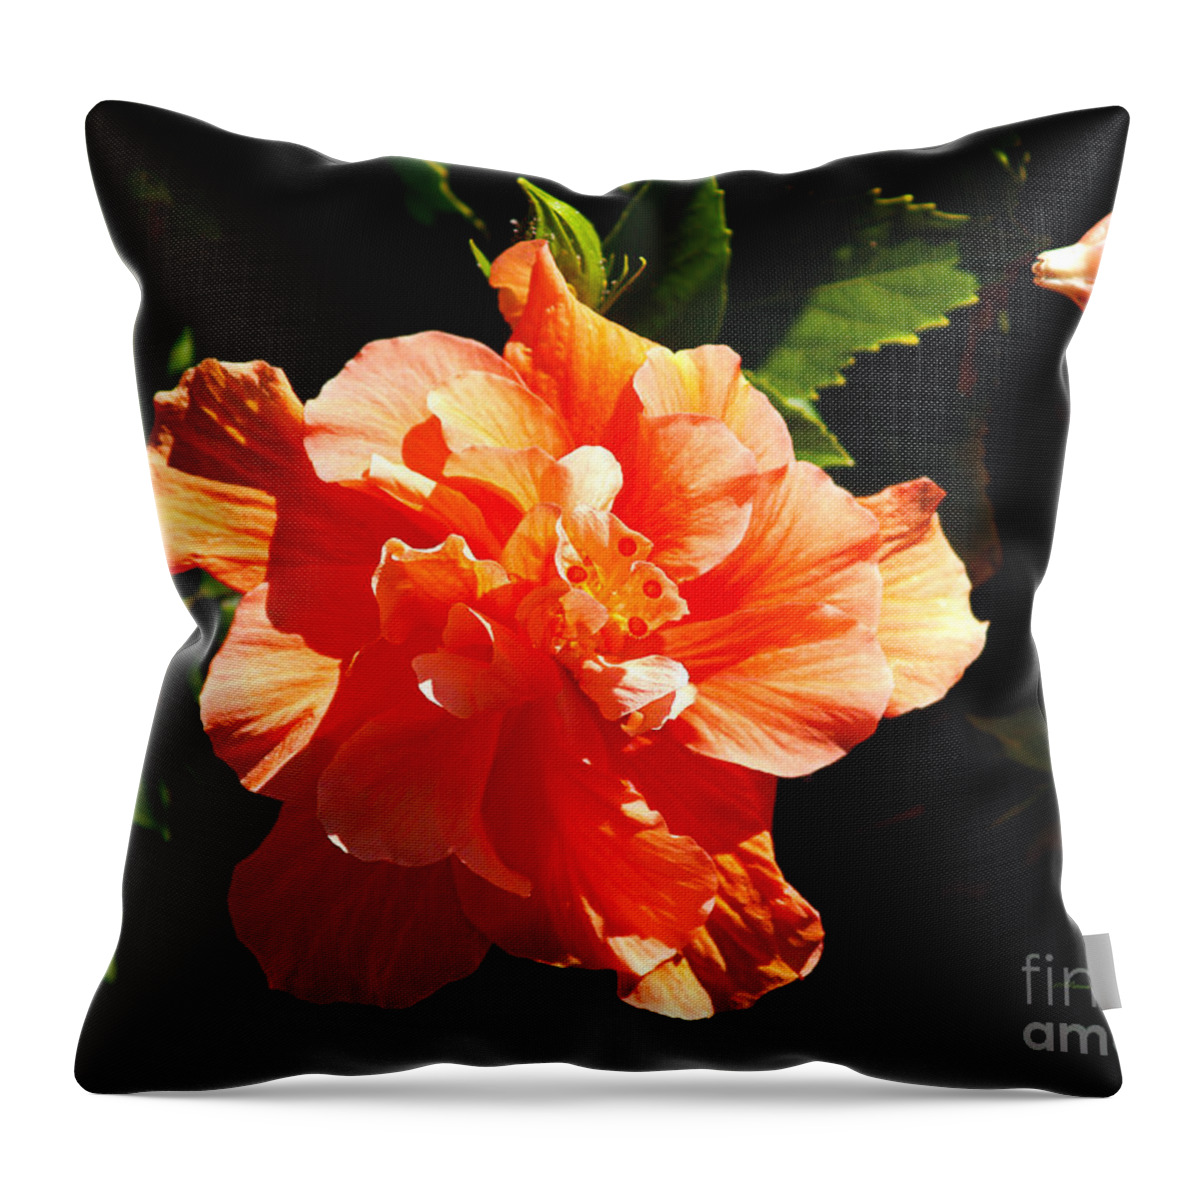 Fine Art Photography Throw Pillow featuring the photograph Orange Hibiscus by Patricia Griffin Brett